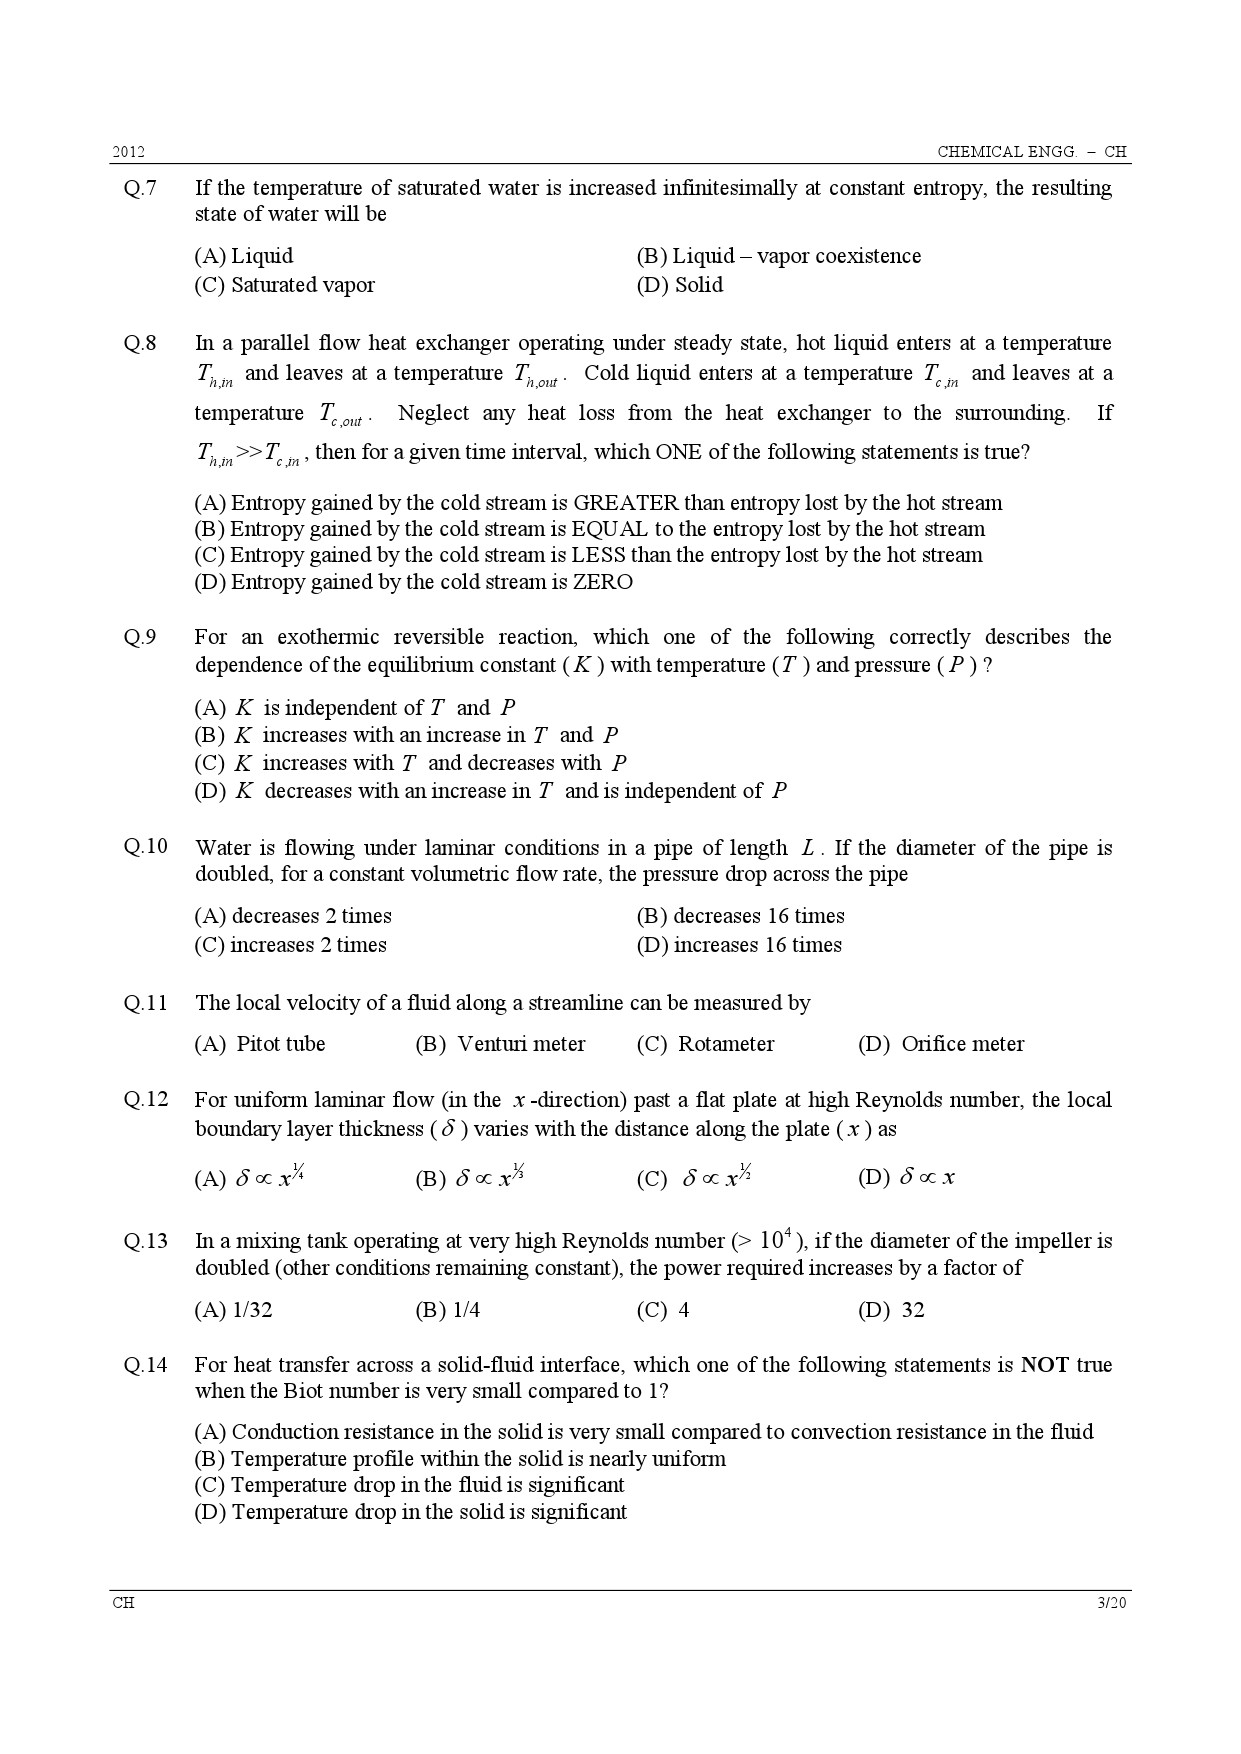 GATE Exam Question Paper 2012 Chemical Engineering 3